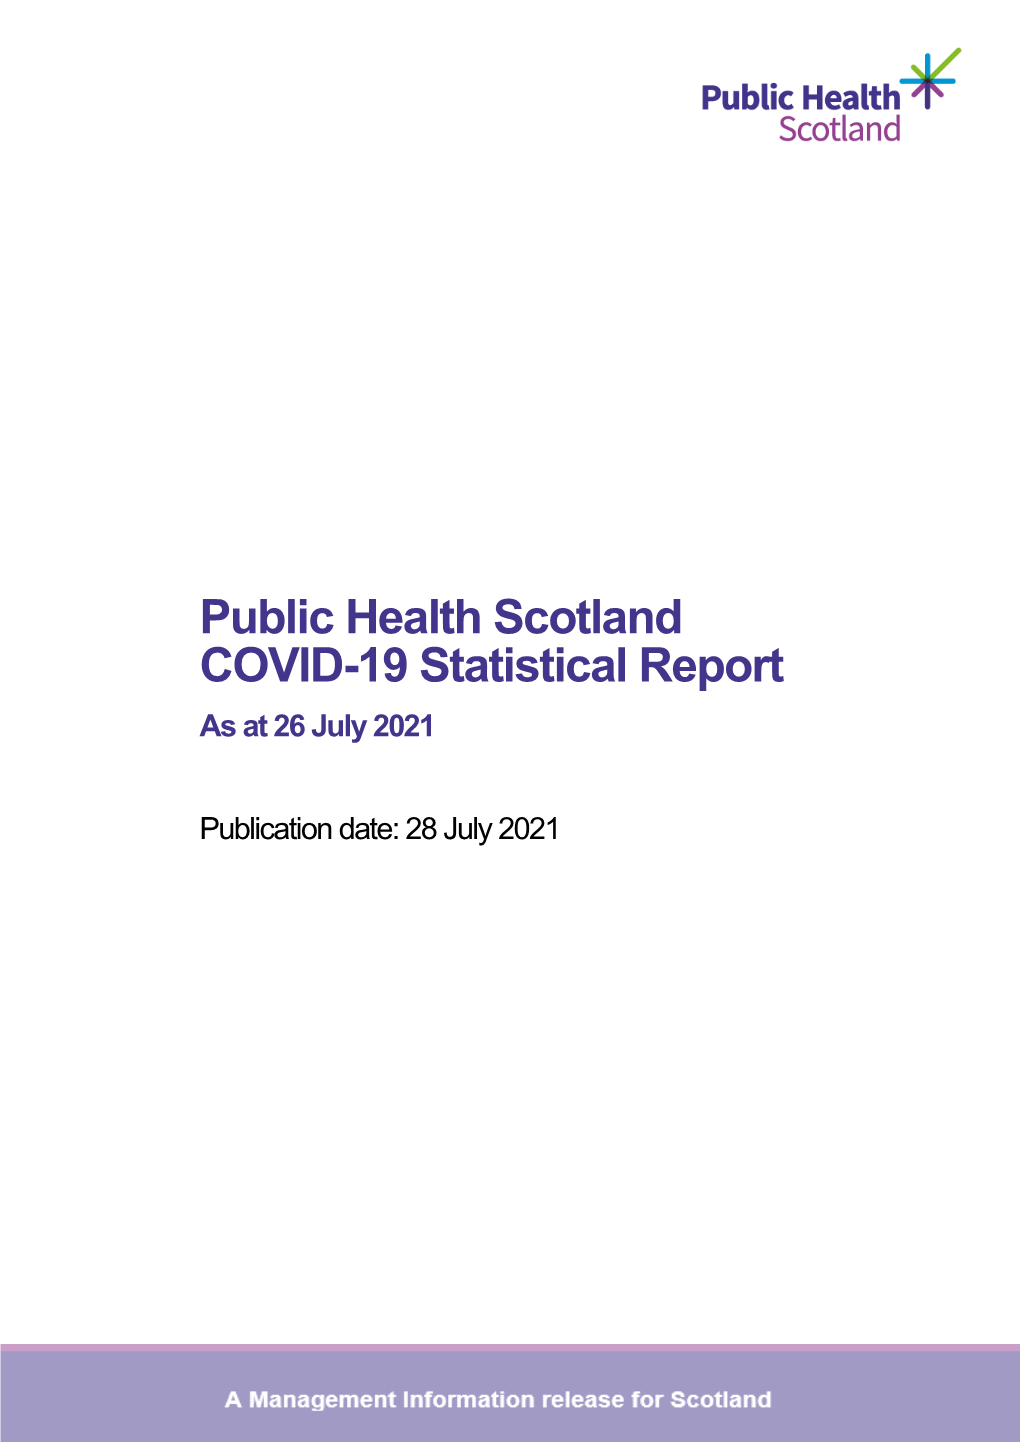 Public Health Scotland COVID-19 Statistical Report As at 26 July 2021